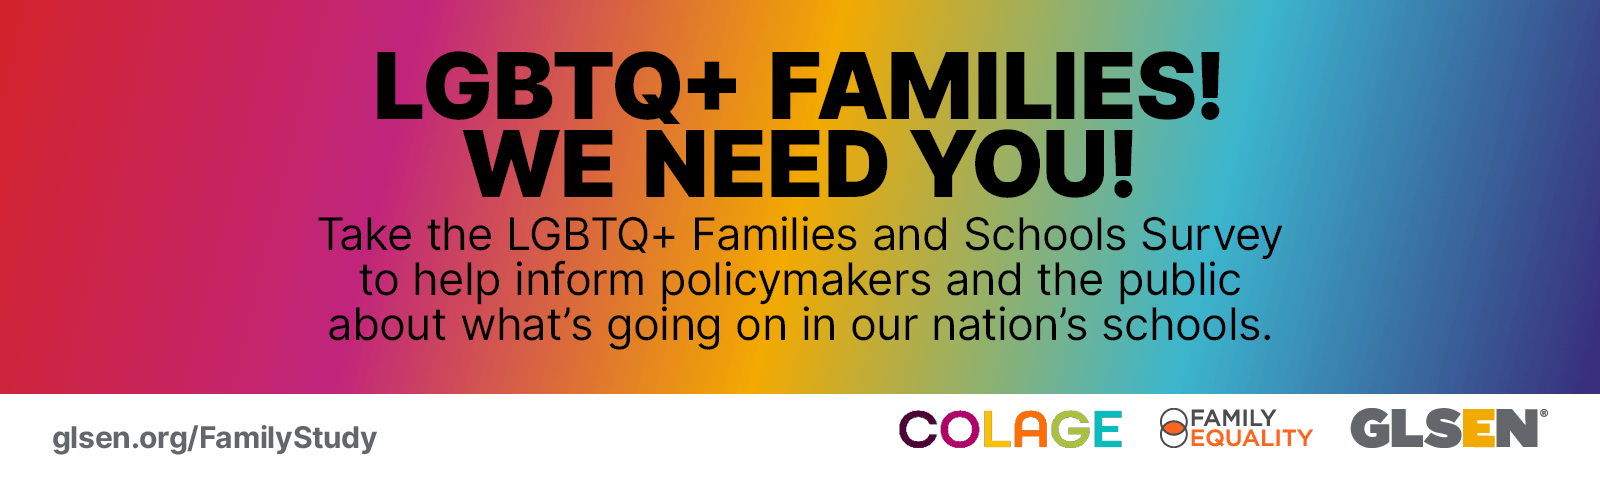 Rainbow gradient background with black text that reads "LGBTQ+ families! We need you! Take the LGBTQ+ Family and Schools Survey and help inform policy makers and the public about what's going on in our nation's schools." White bar below that with "GLSEN.org/FamilyStudy" in gray on bottom left and logos for Colage, Family Equality, and GLSEN in bottom right corner. 